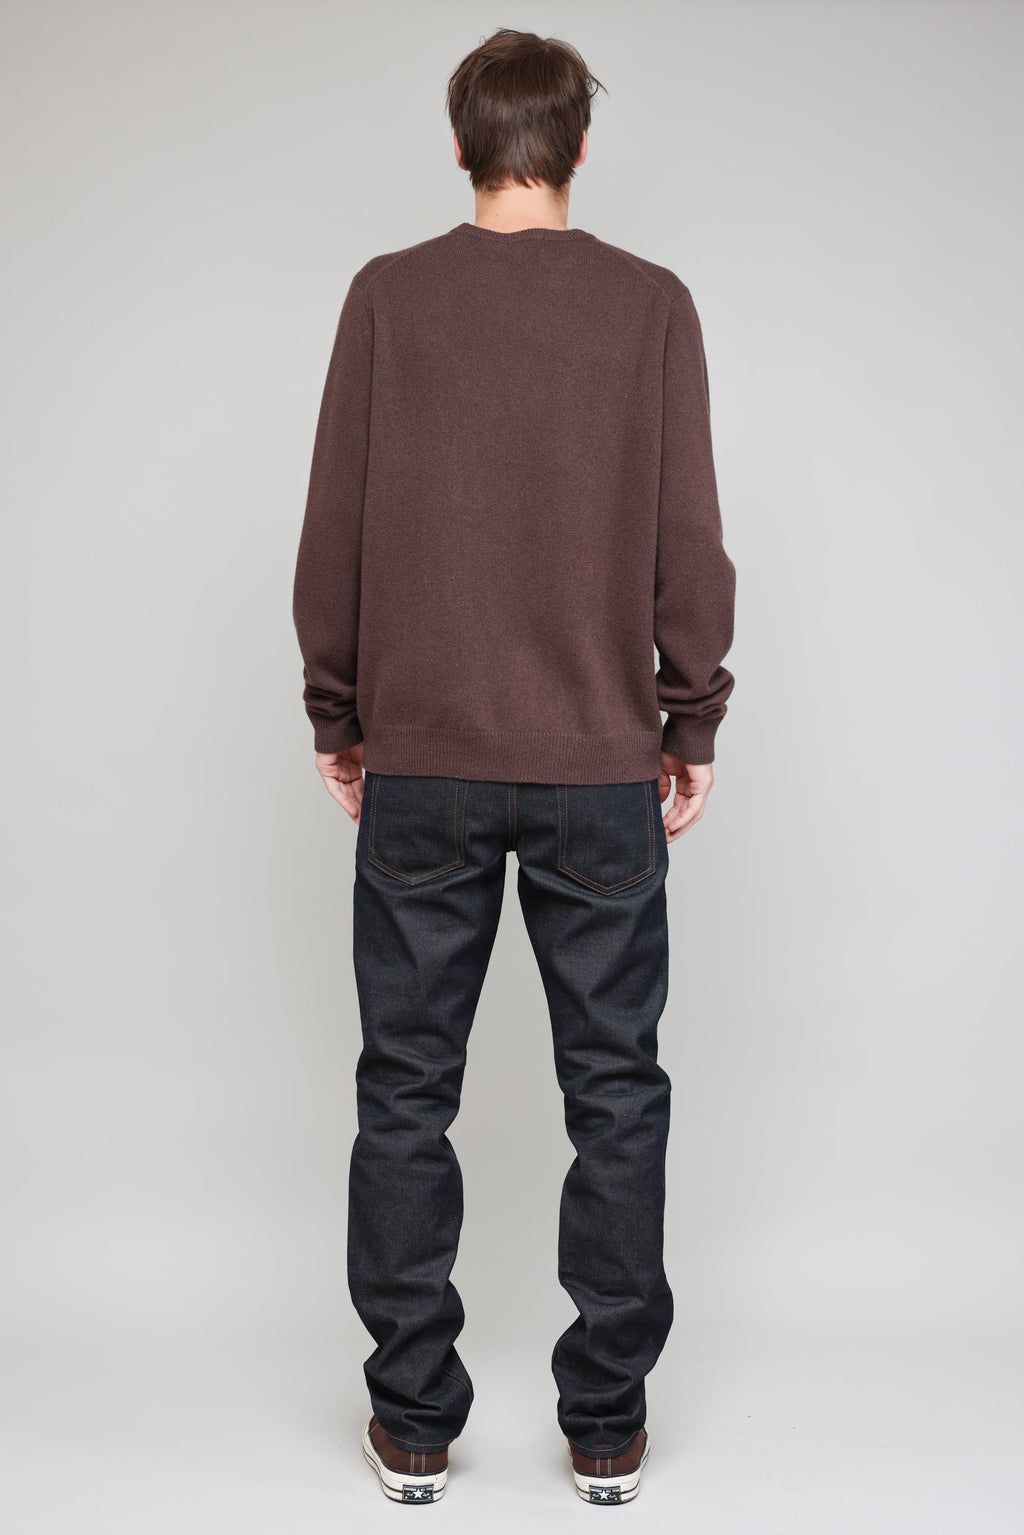 New Wool Crew in Brown 04